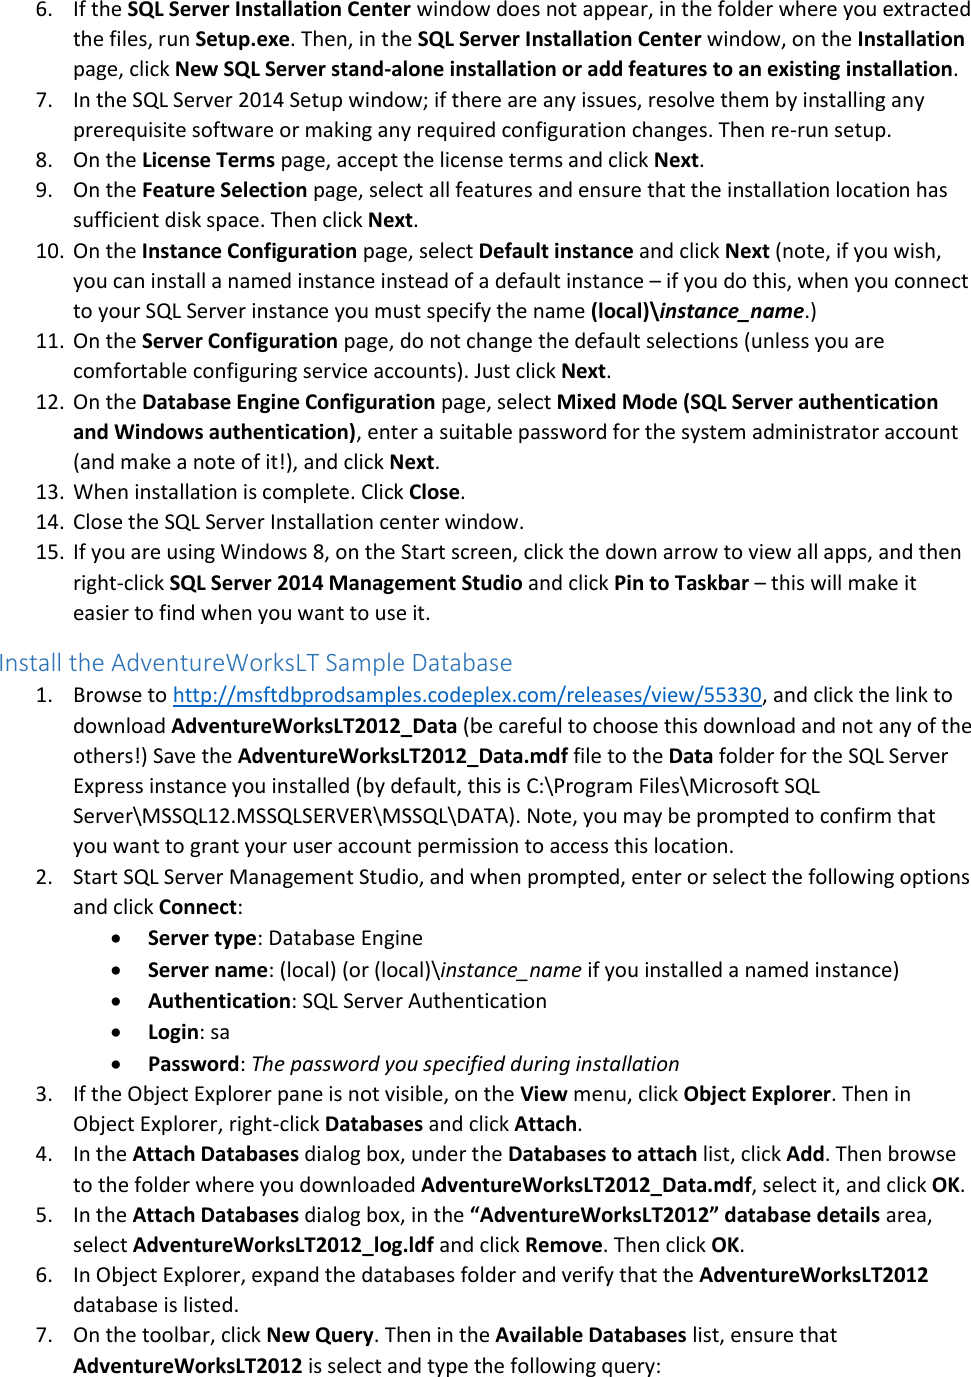 Page 10 of 11 - Getting Started With Transact-SQL Labs MVA Setup Guide